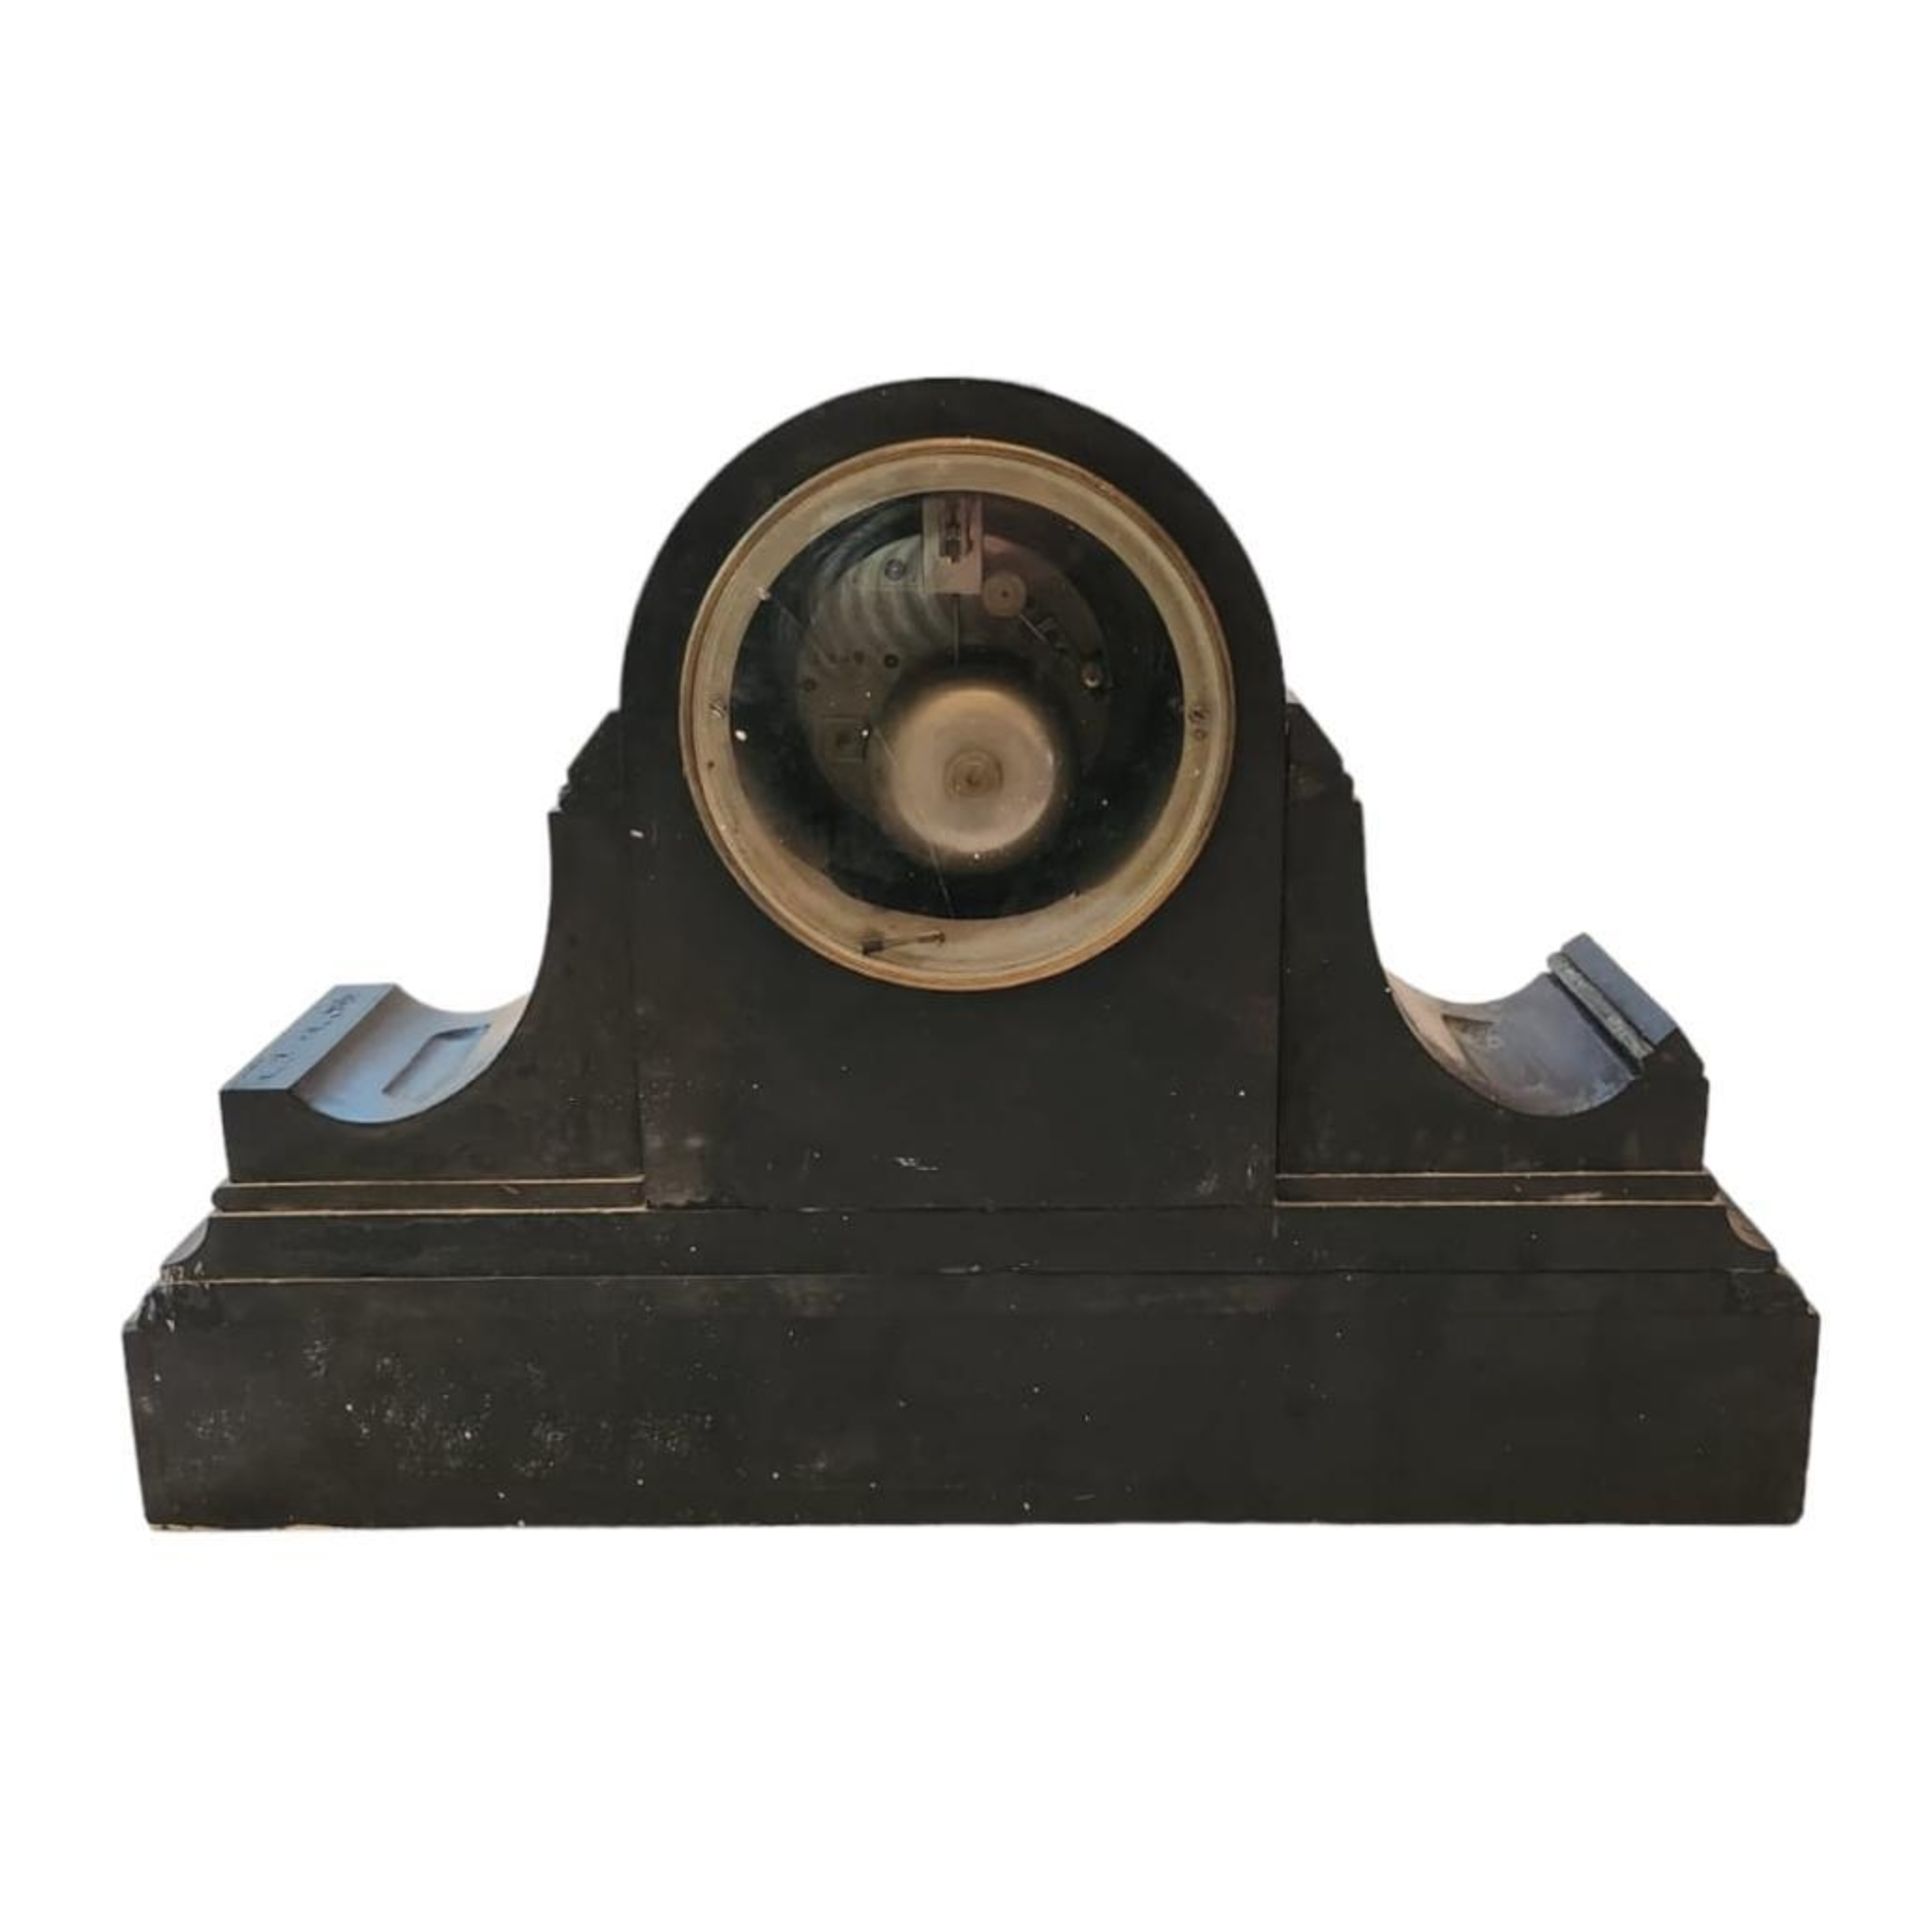 A Victorian Slate Mantel Clock with Eight Day French Bell Strike Movement and Visual Escapement. - Image 7 of 13